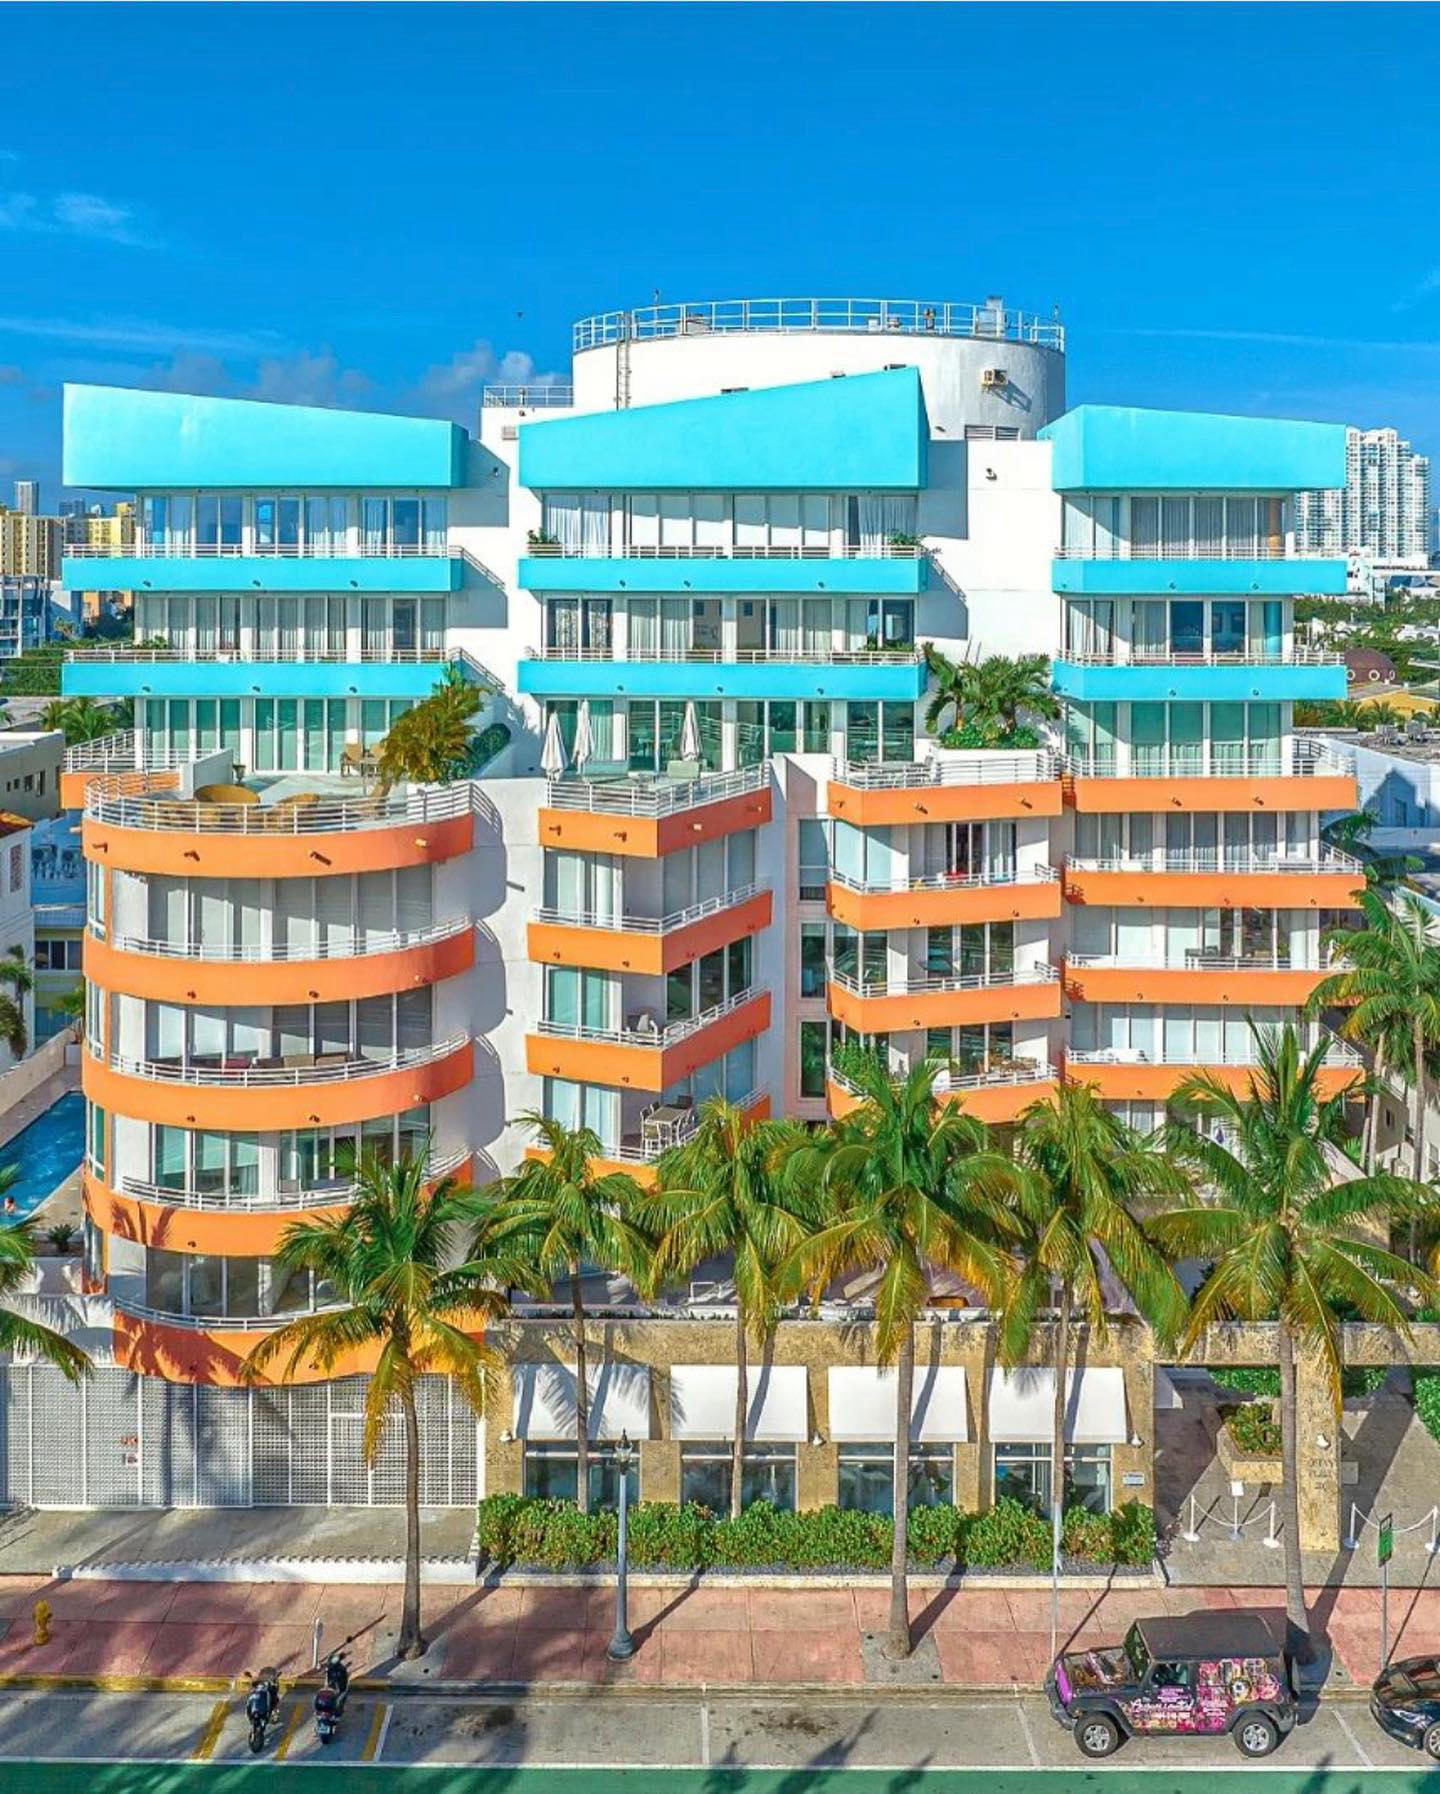 One of South Beach’s most iconic art deco buildings